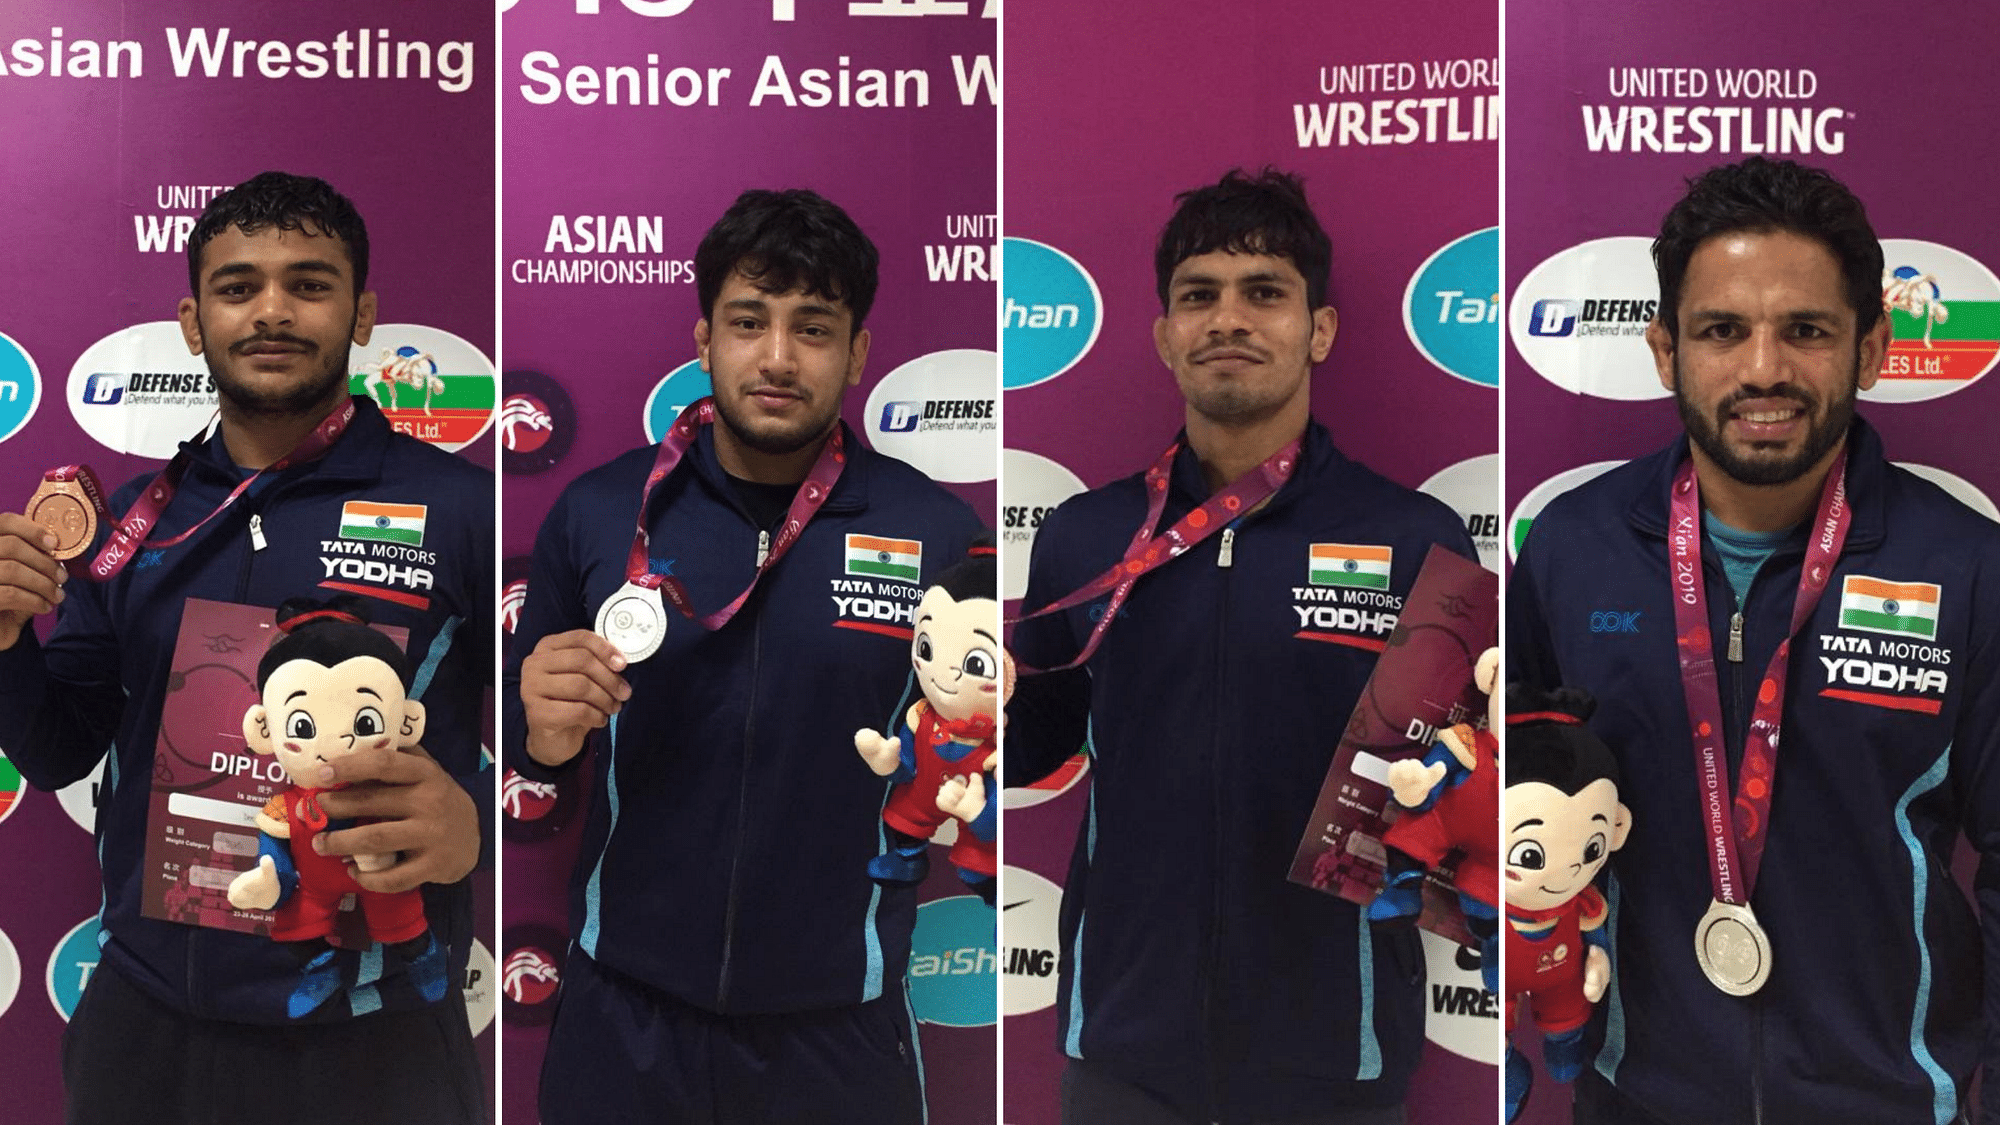 Deepak Punia, Vicky, Rahul Aware and Amit Dhankar with their medals on Day 2 of the Asian Wrestling Championships.